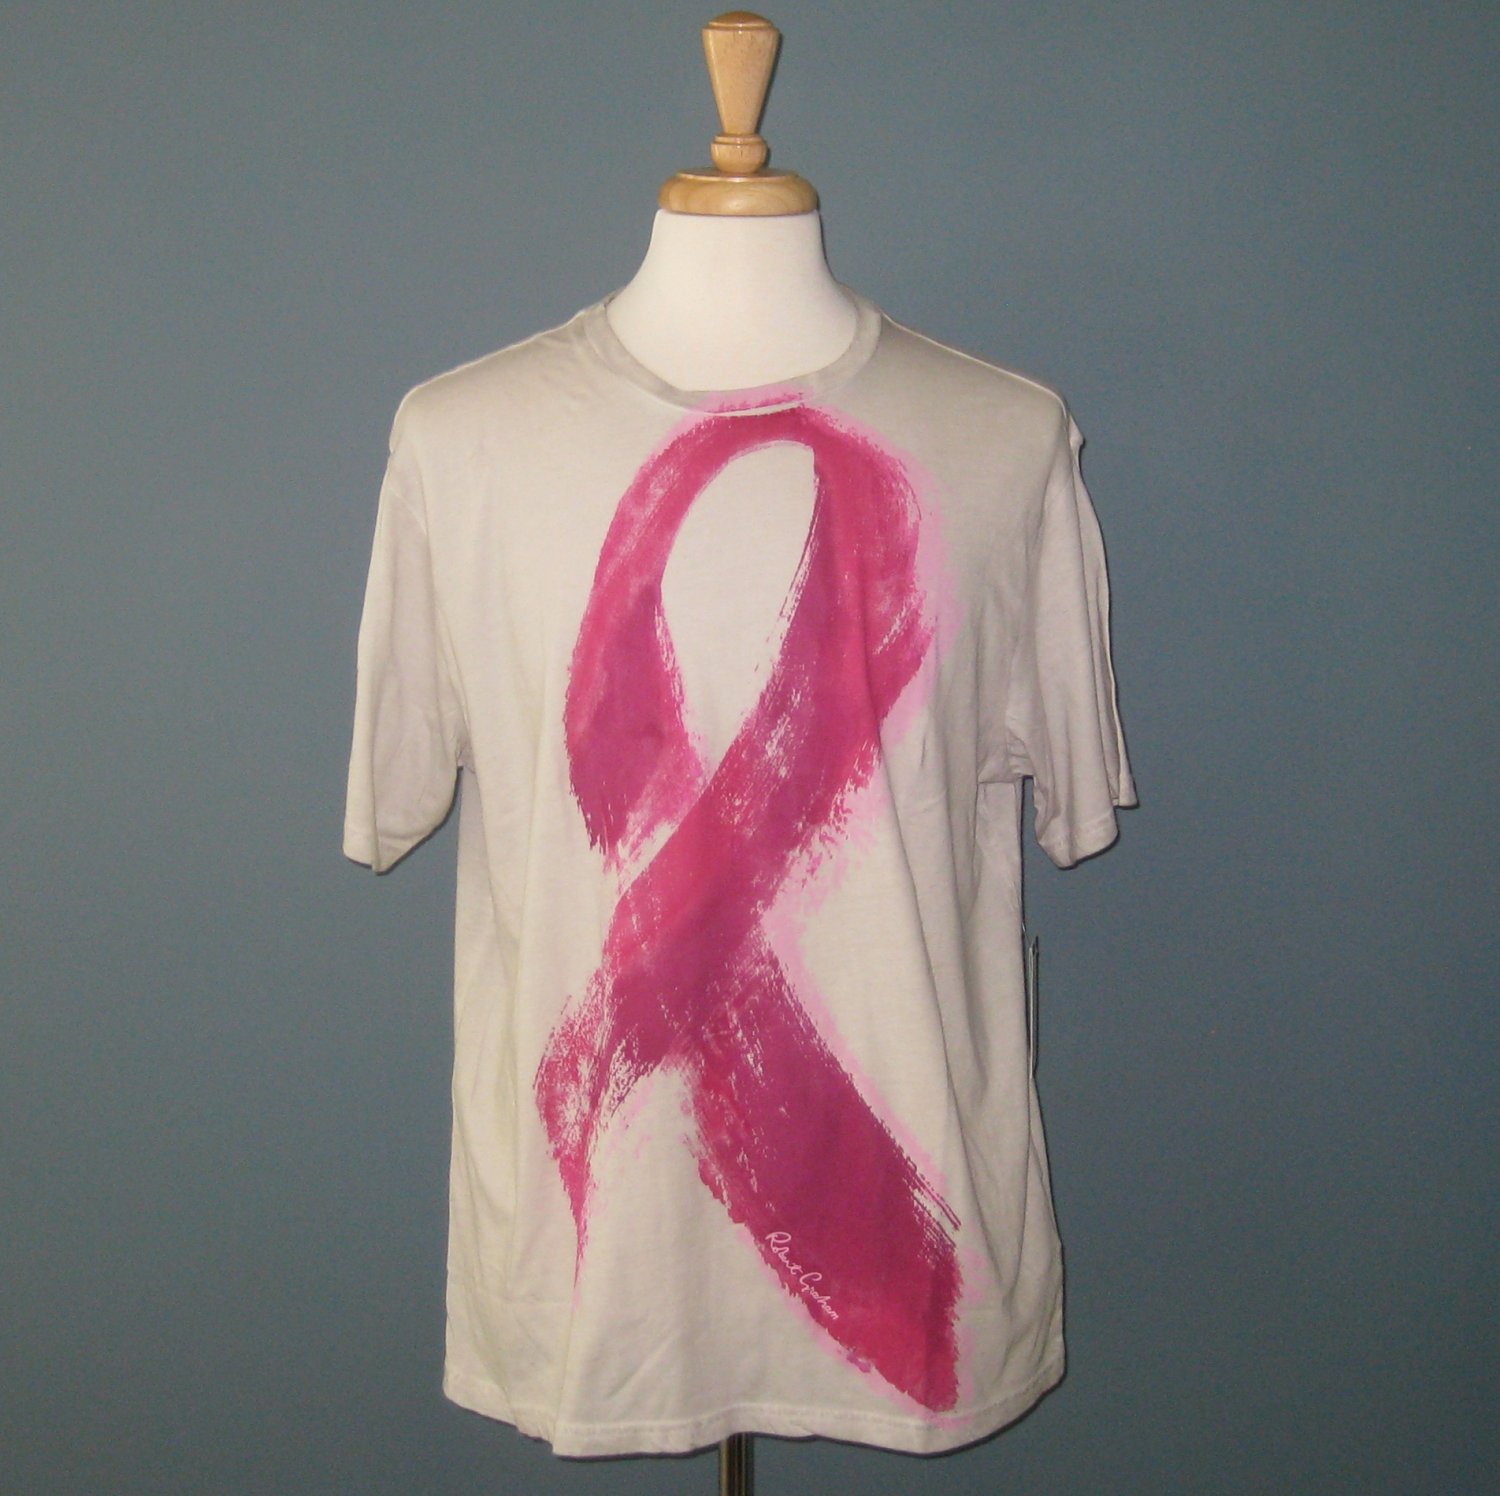 NWT Robert Graham 'The Fight' Breast Cancer Awareness Ribbon 100% Cotton T-Shirt - L